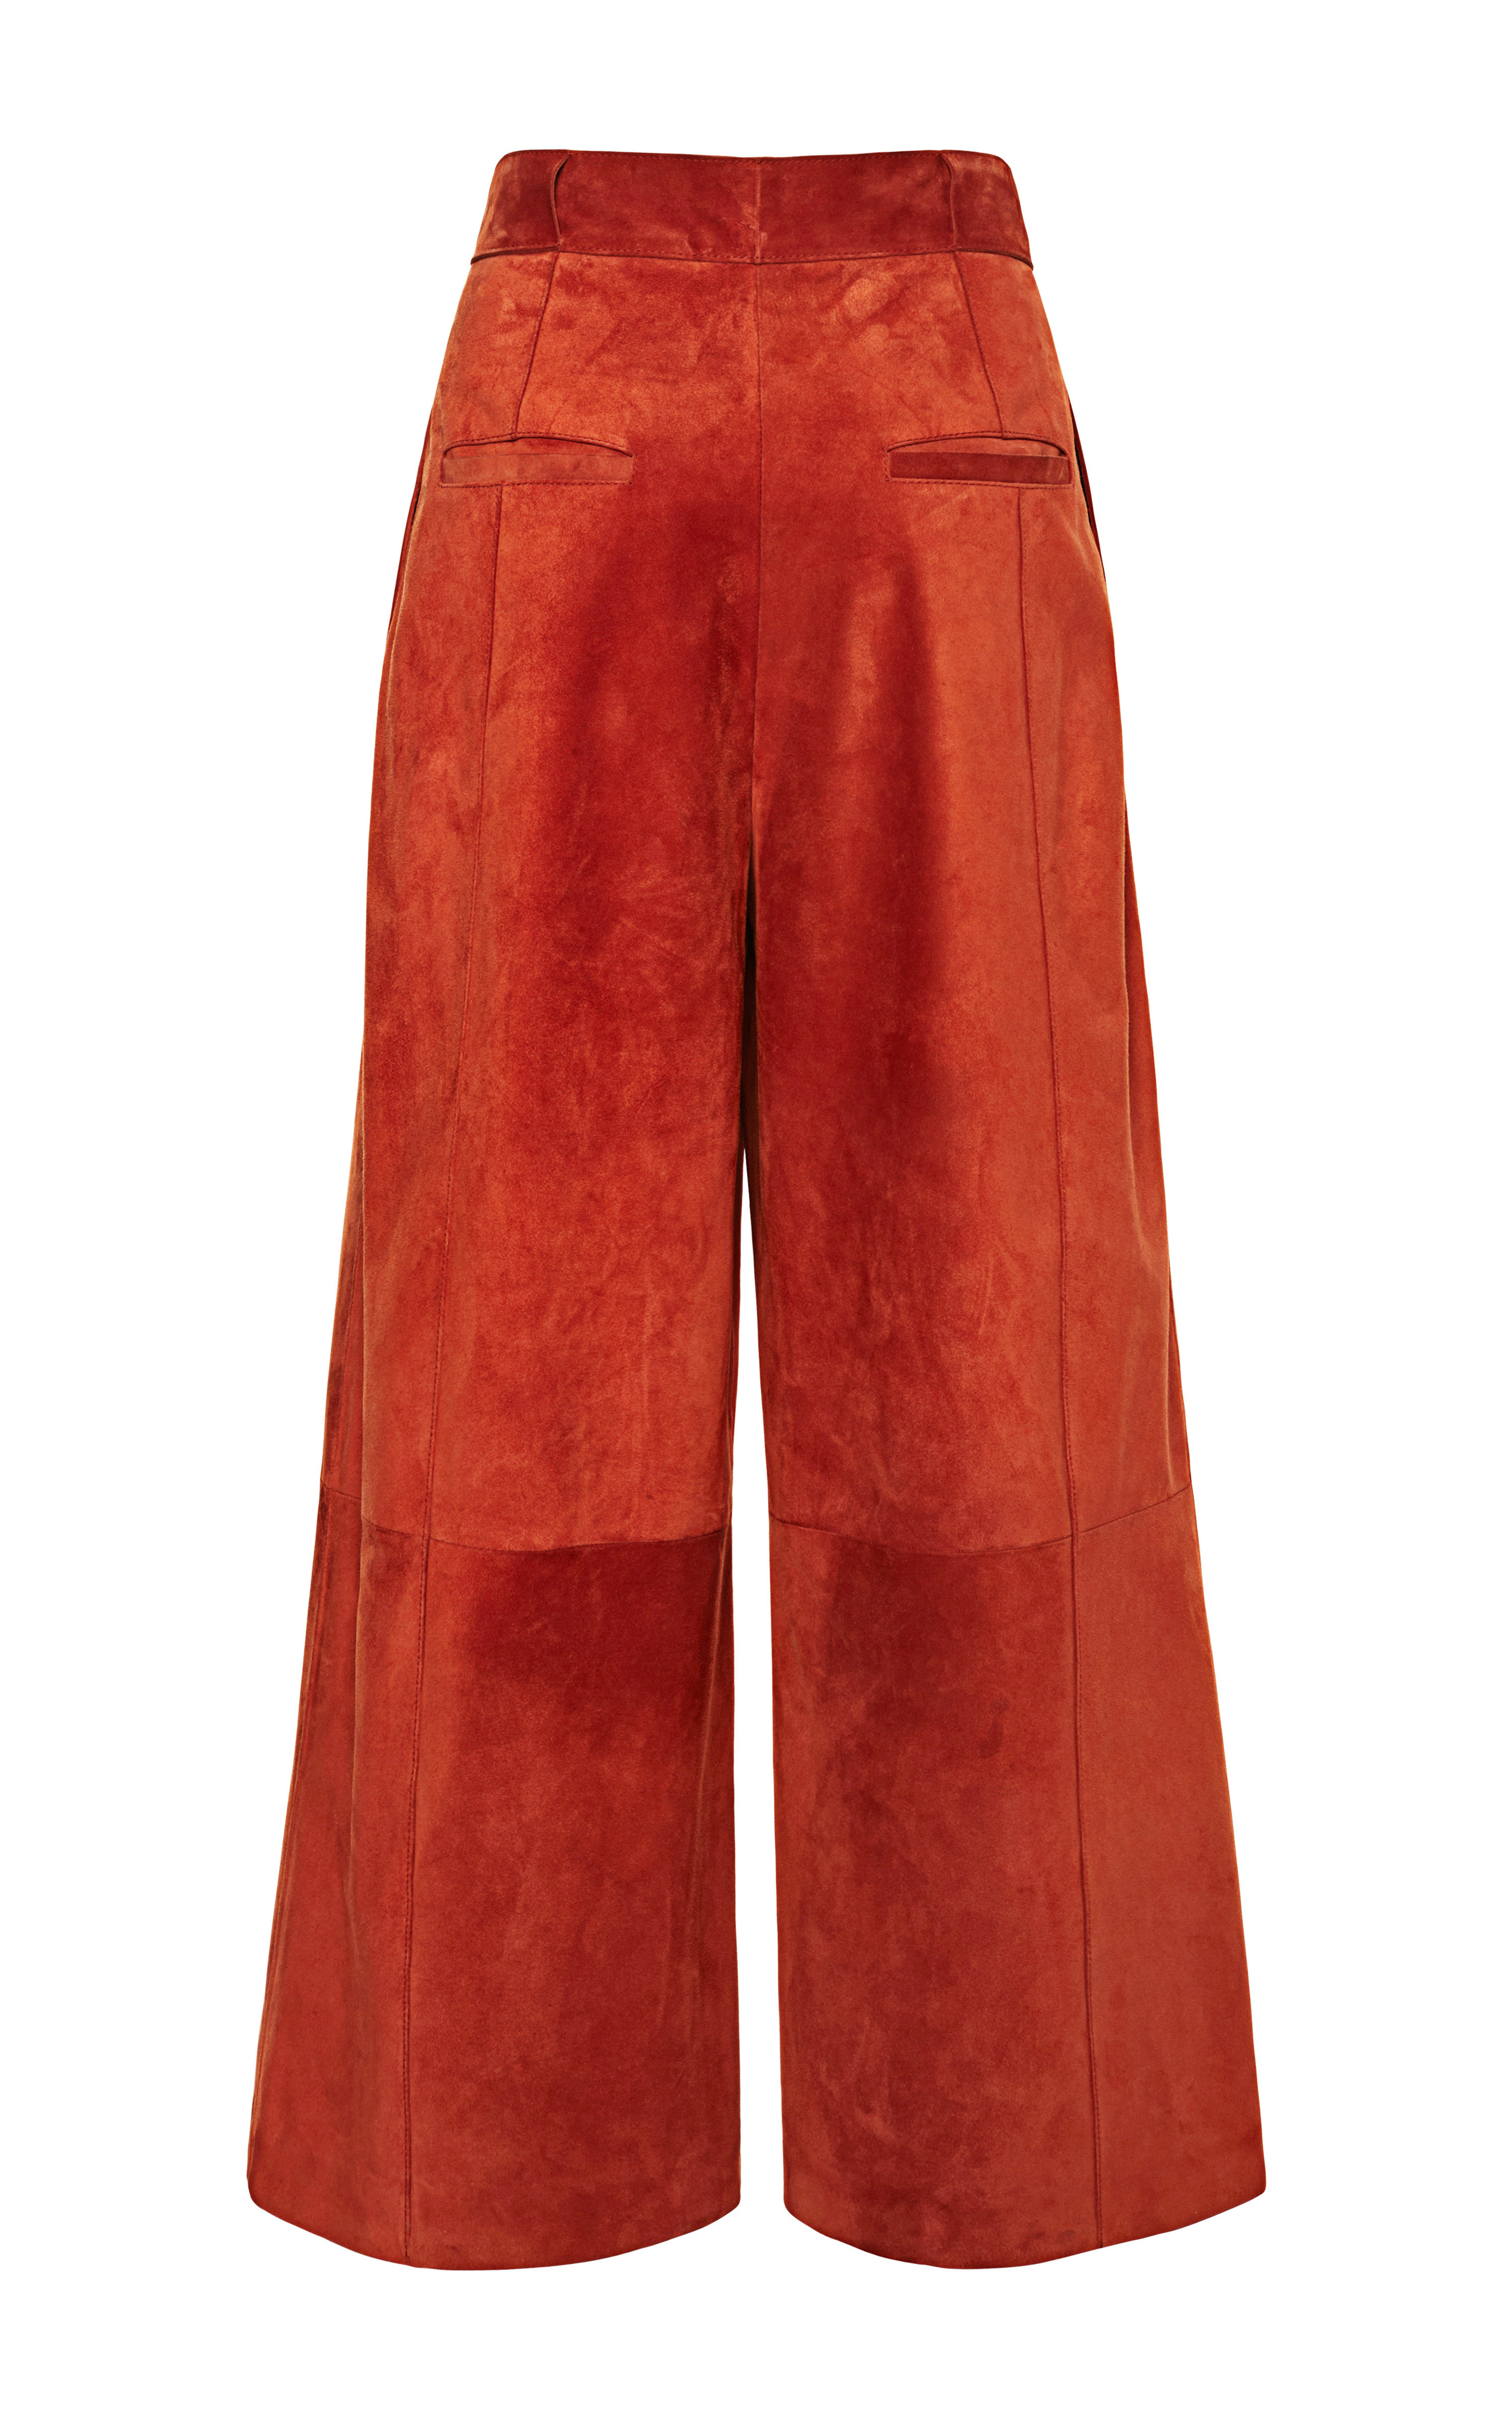 Lyst - Proenza Schouler Suede Suiting High Waist Culottes Pant in Red